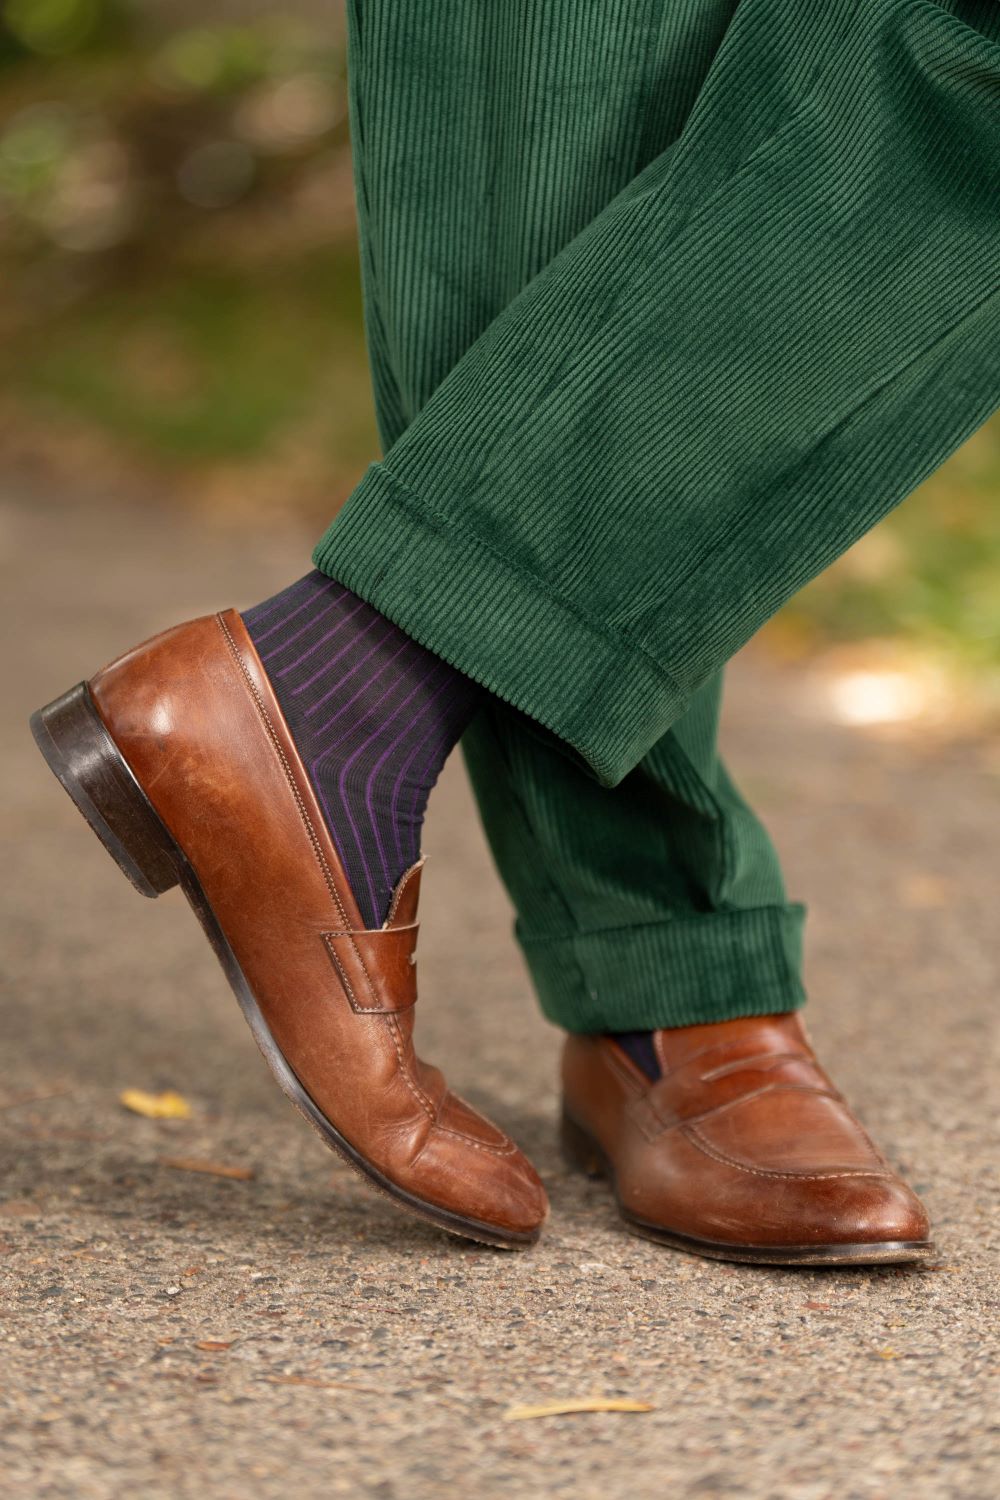 Brown loafers, shadow striped socks in dark green and purple as well as British Racing Green Stancliffe Corduroy Trousers by Fort Belvedere